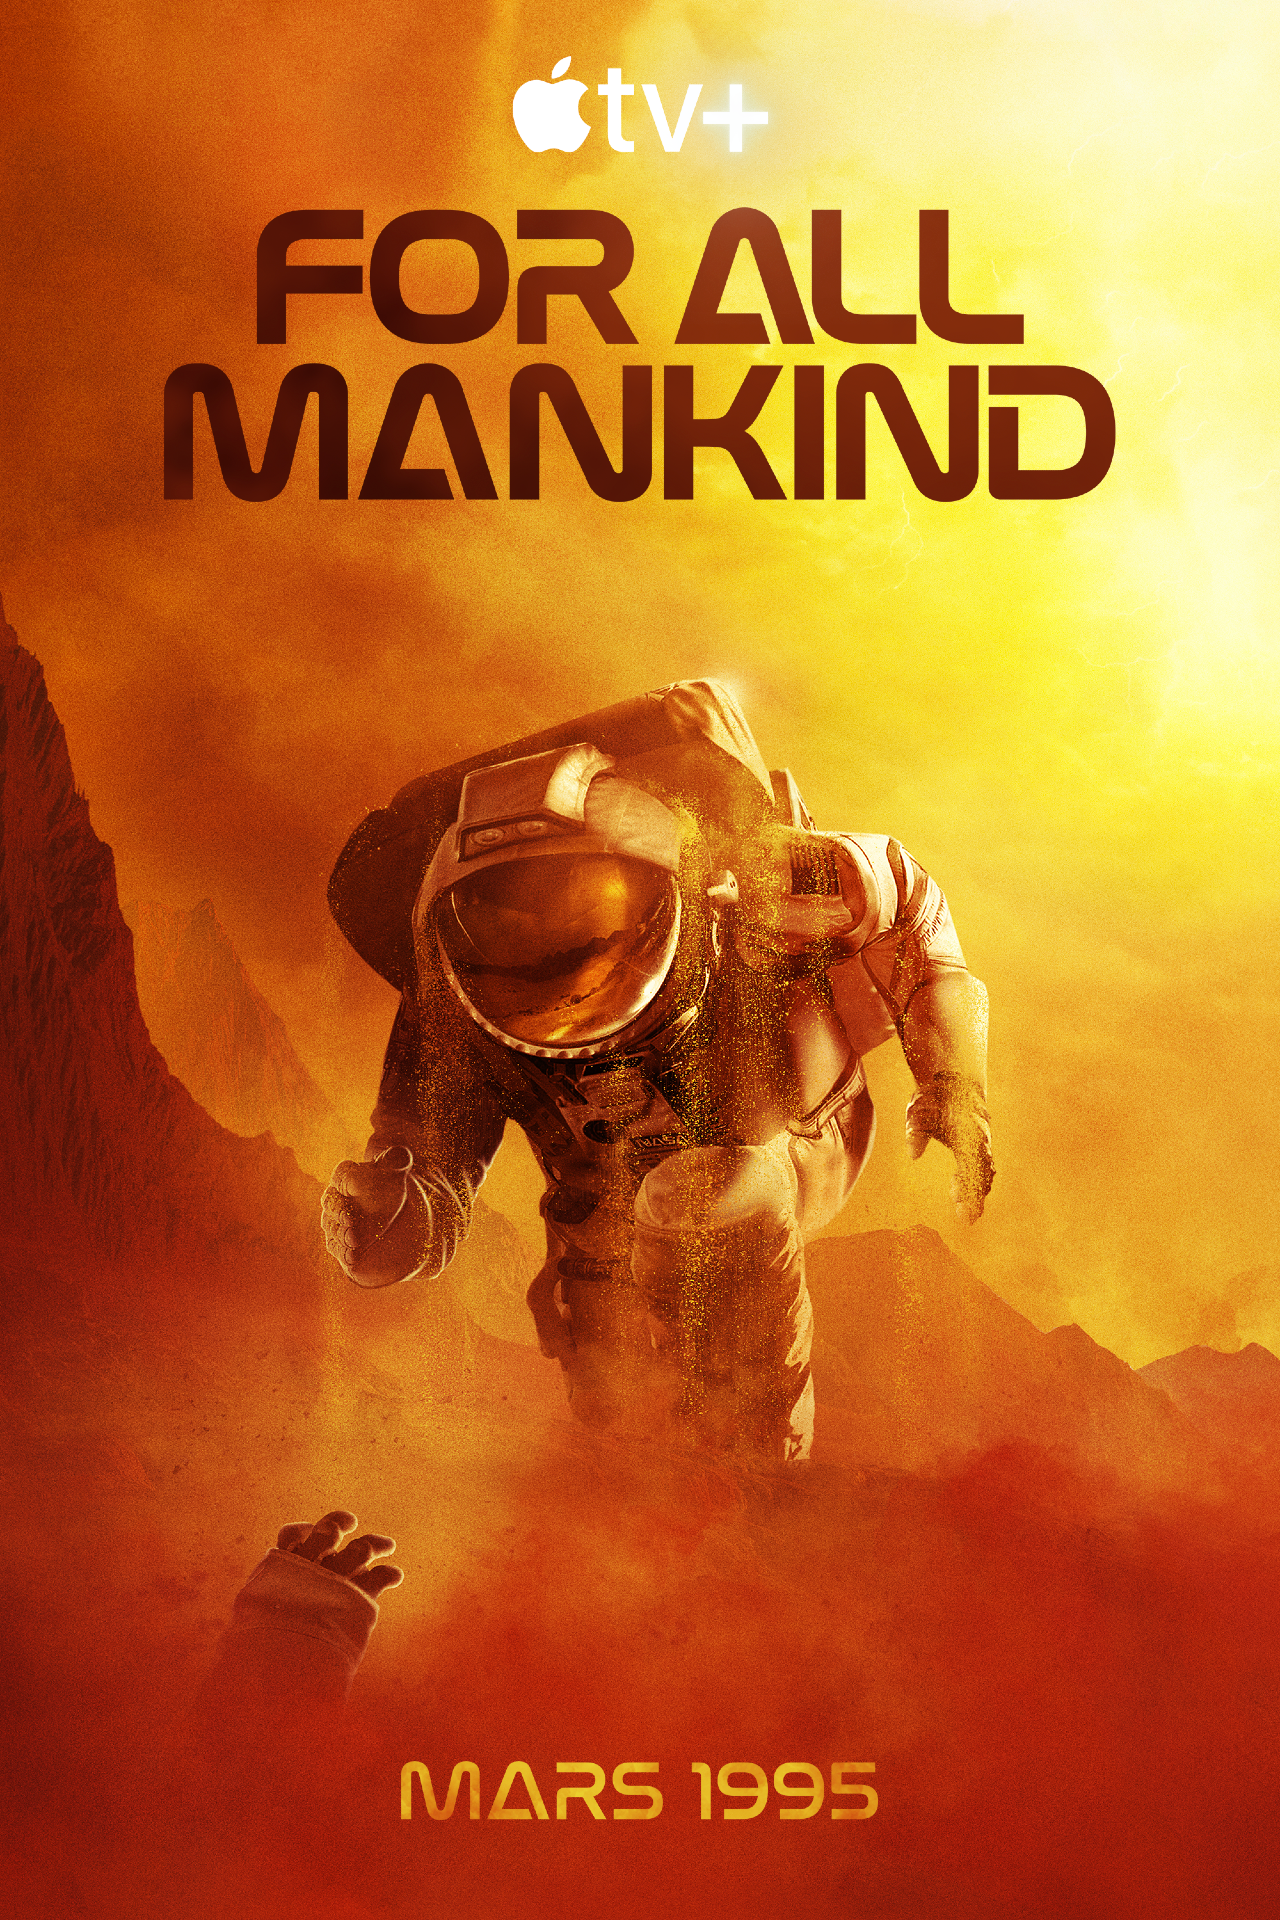 https://static.wikia.nocookie.net/for-all-mankind/images/9/91/For_All_Mankind_season_3_poster.png/revision/latest?cb=20220516181732